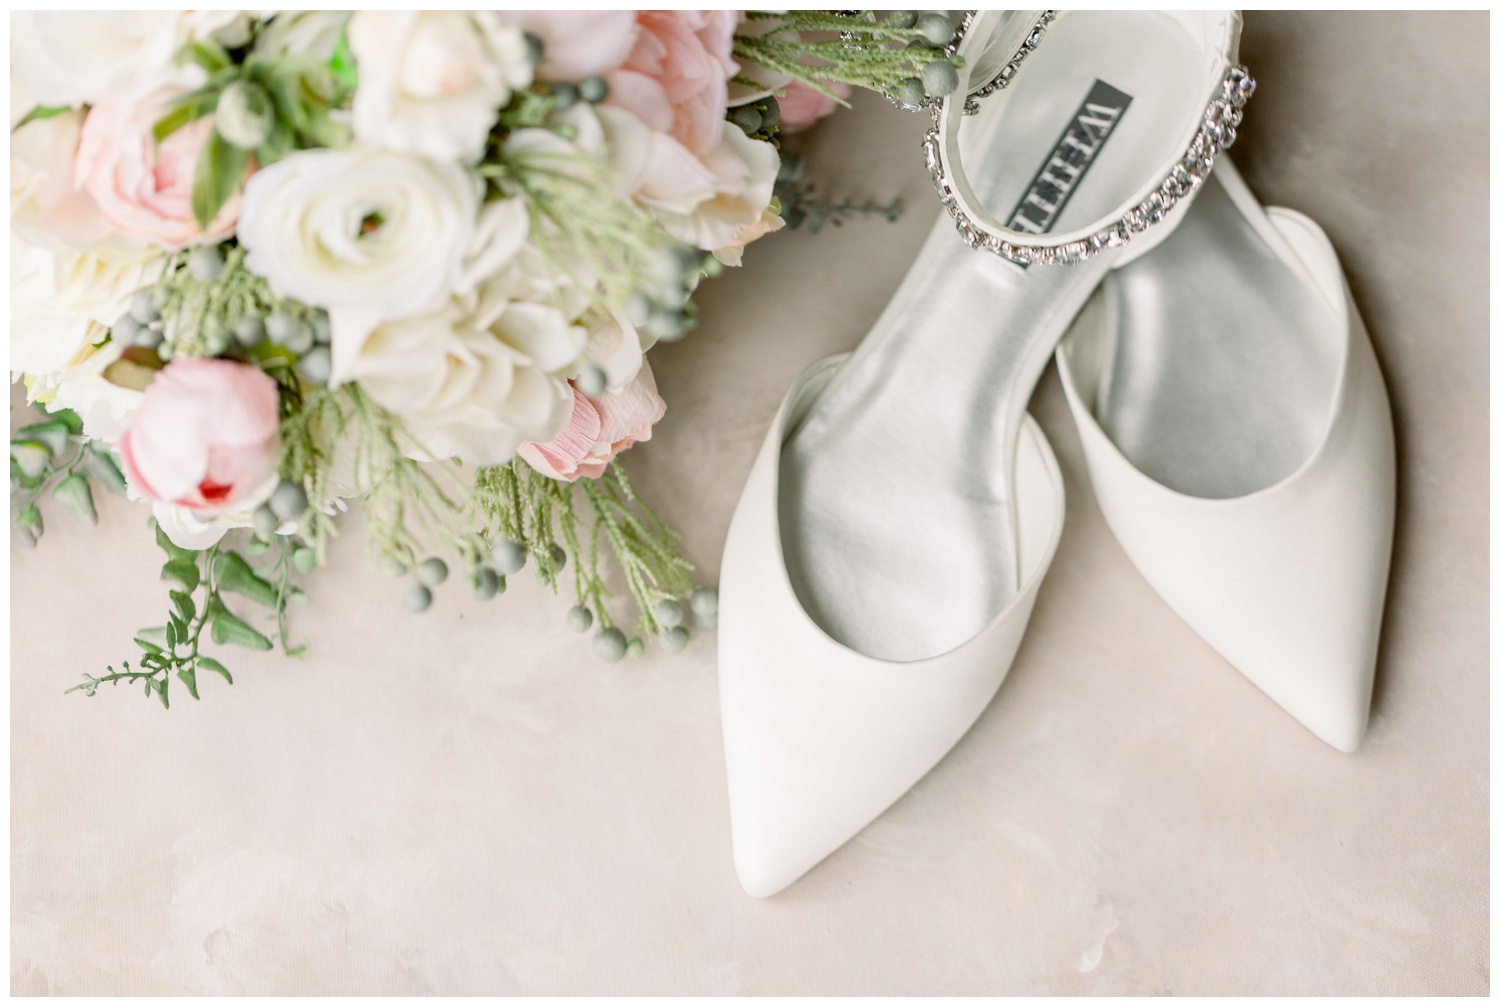 Wedding Shoes and Flowers